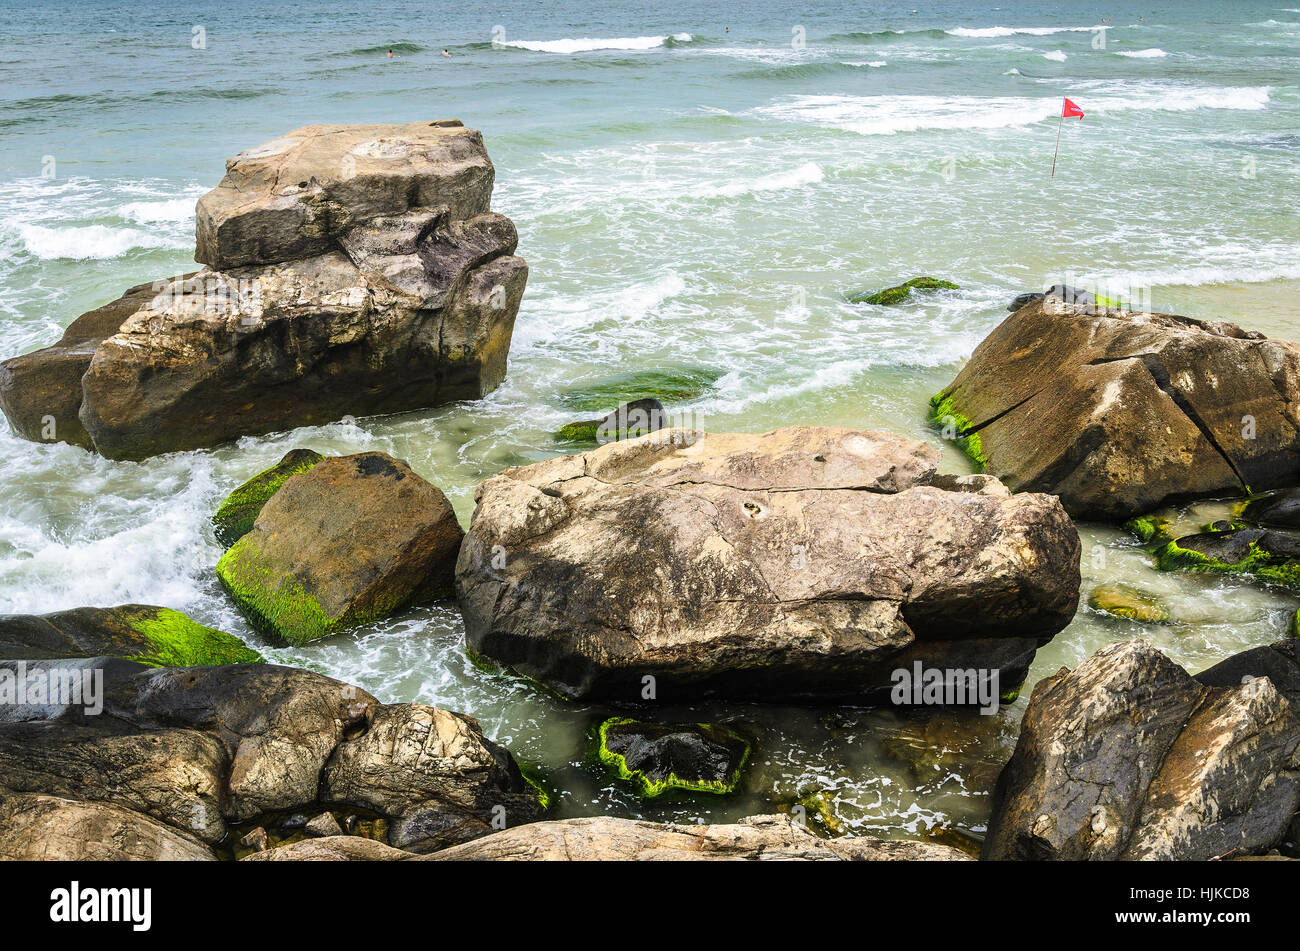 Beautiful scene with stones with green moss on the seashore, sea water passing between them, some small waves and people swimming in the background. Stock Photo